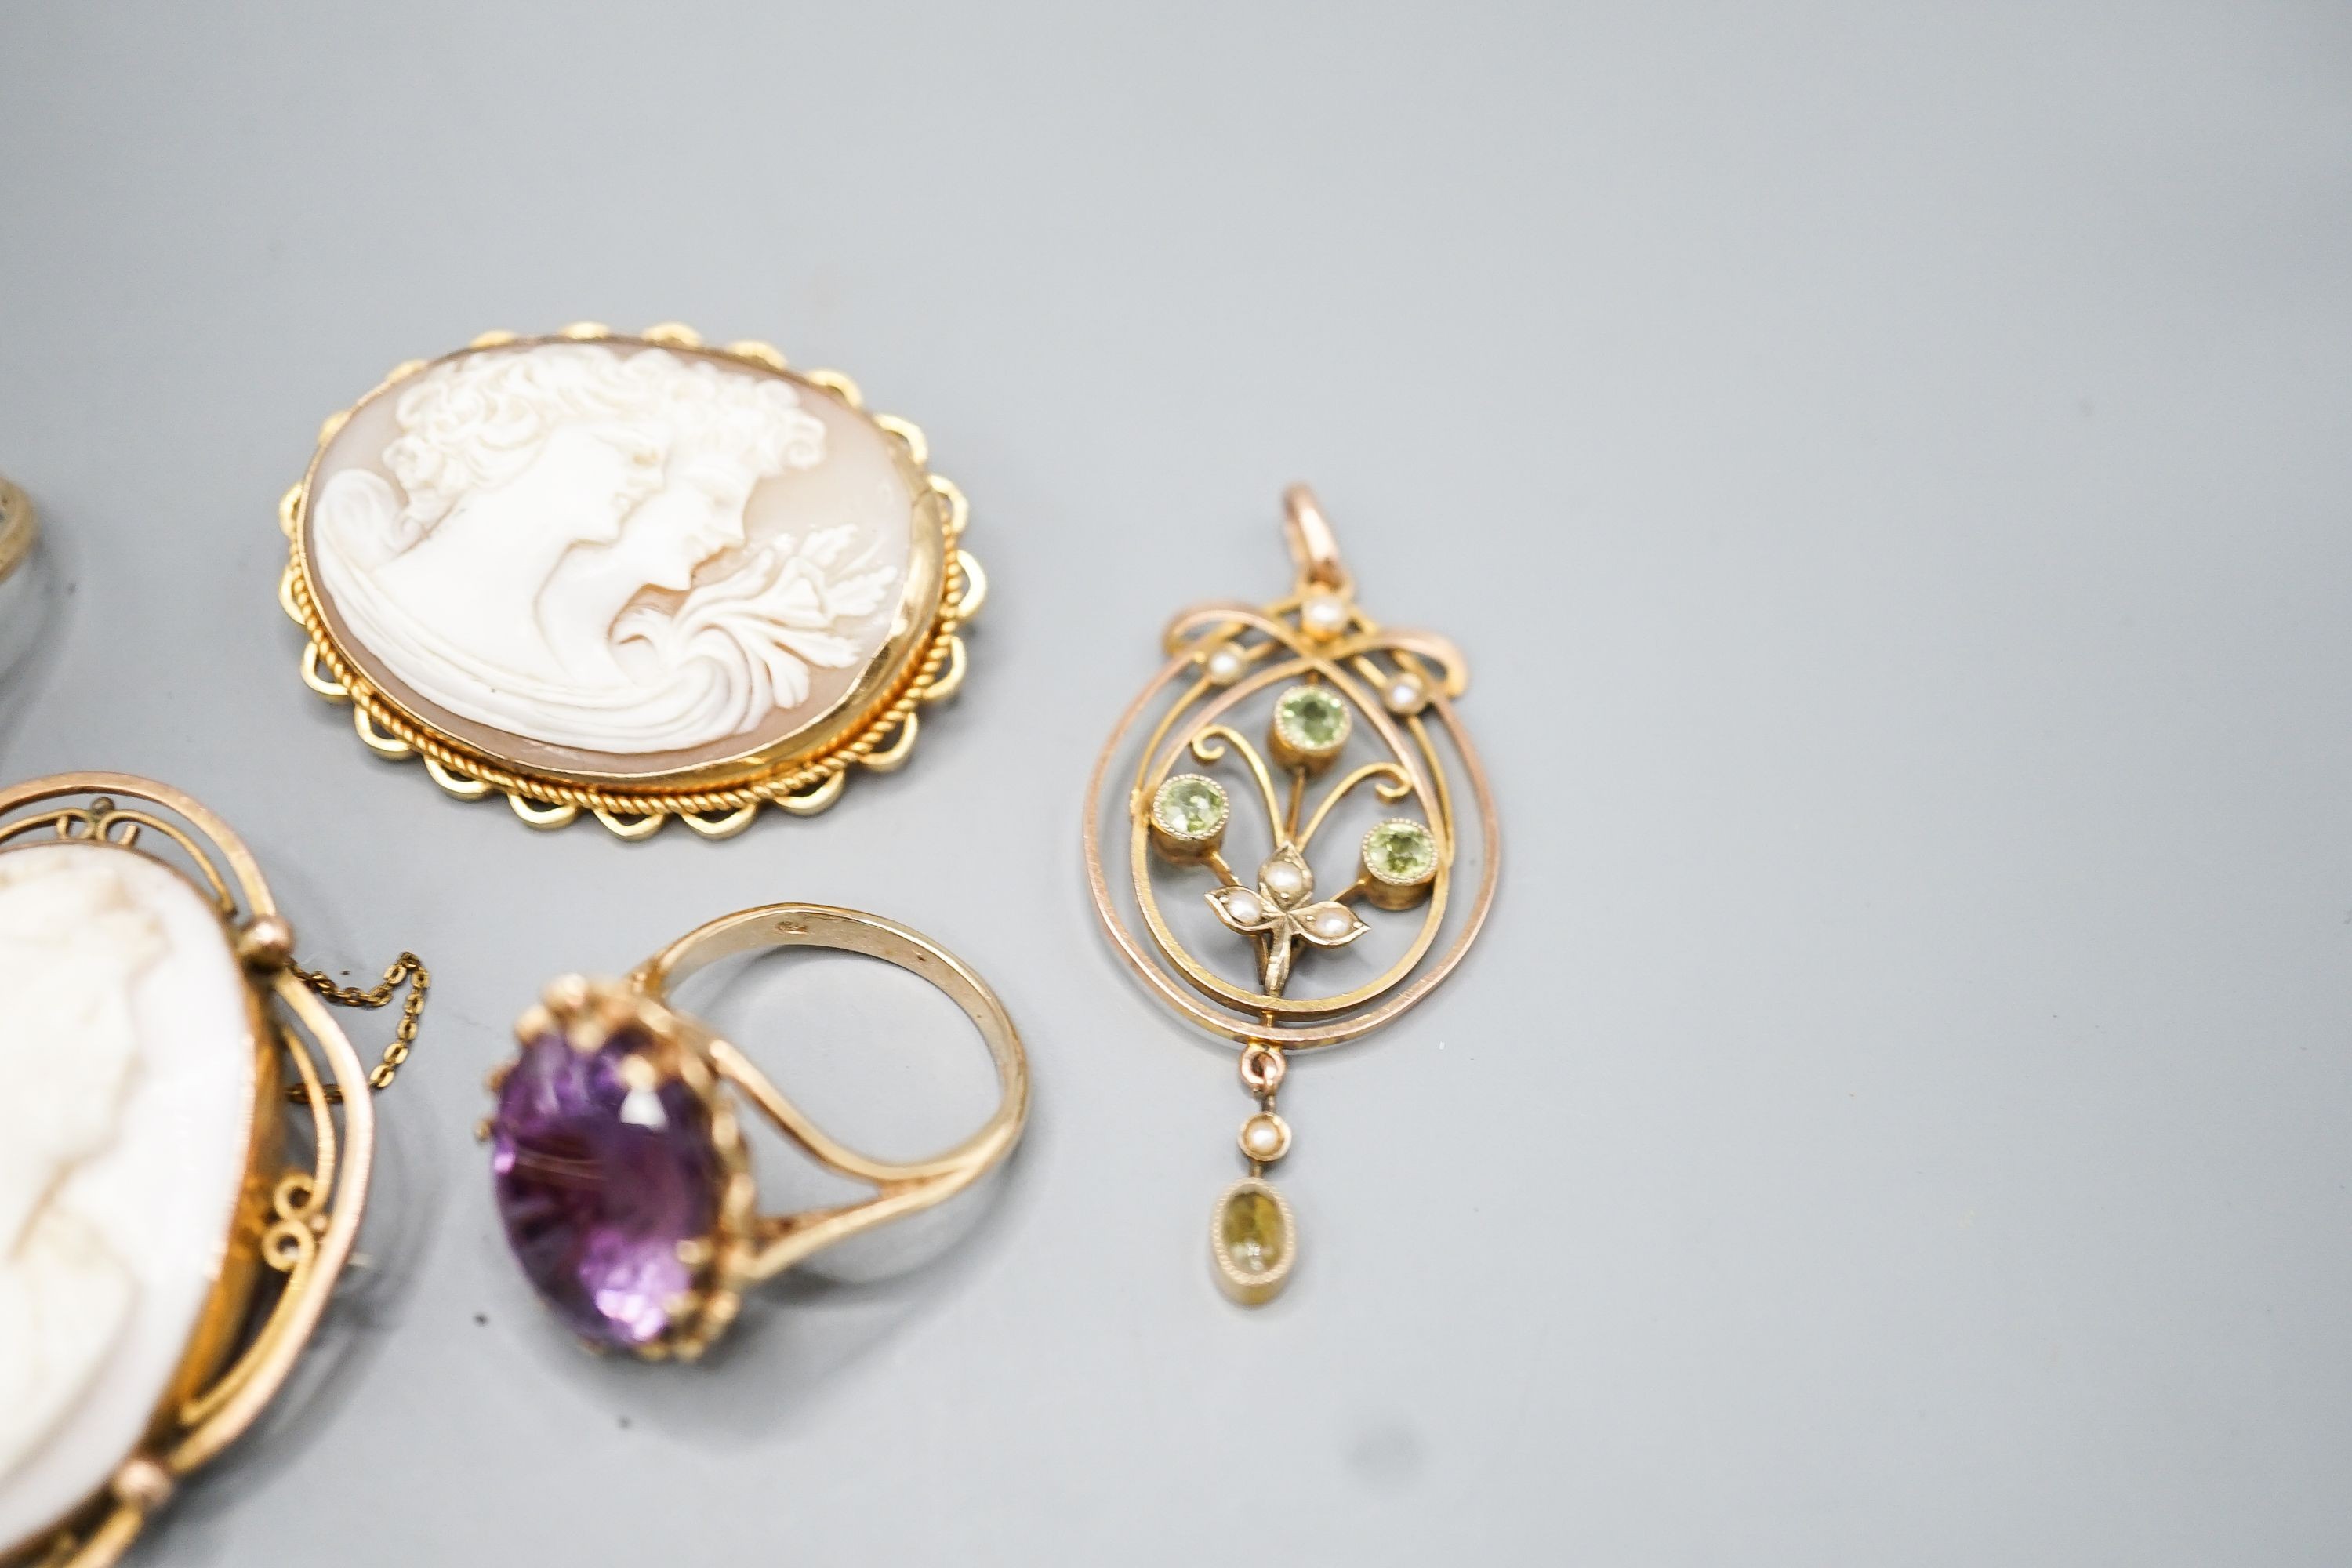 Two modern 9ct gold and gem set rings, a 9ct and gem set pendant, two 9ct mounted cameo shell brooches, gross weight 36.5 grams and a Victorian oval pendant frame, 55mm.